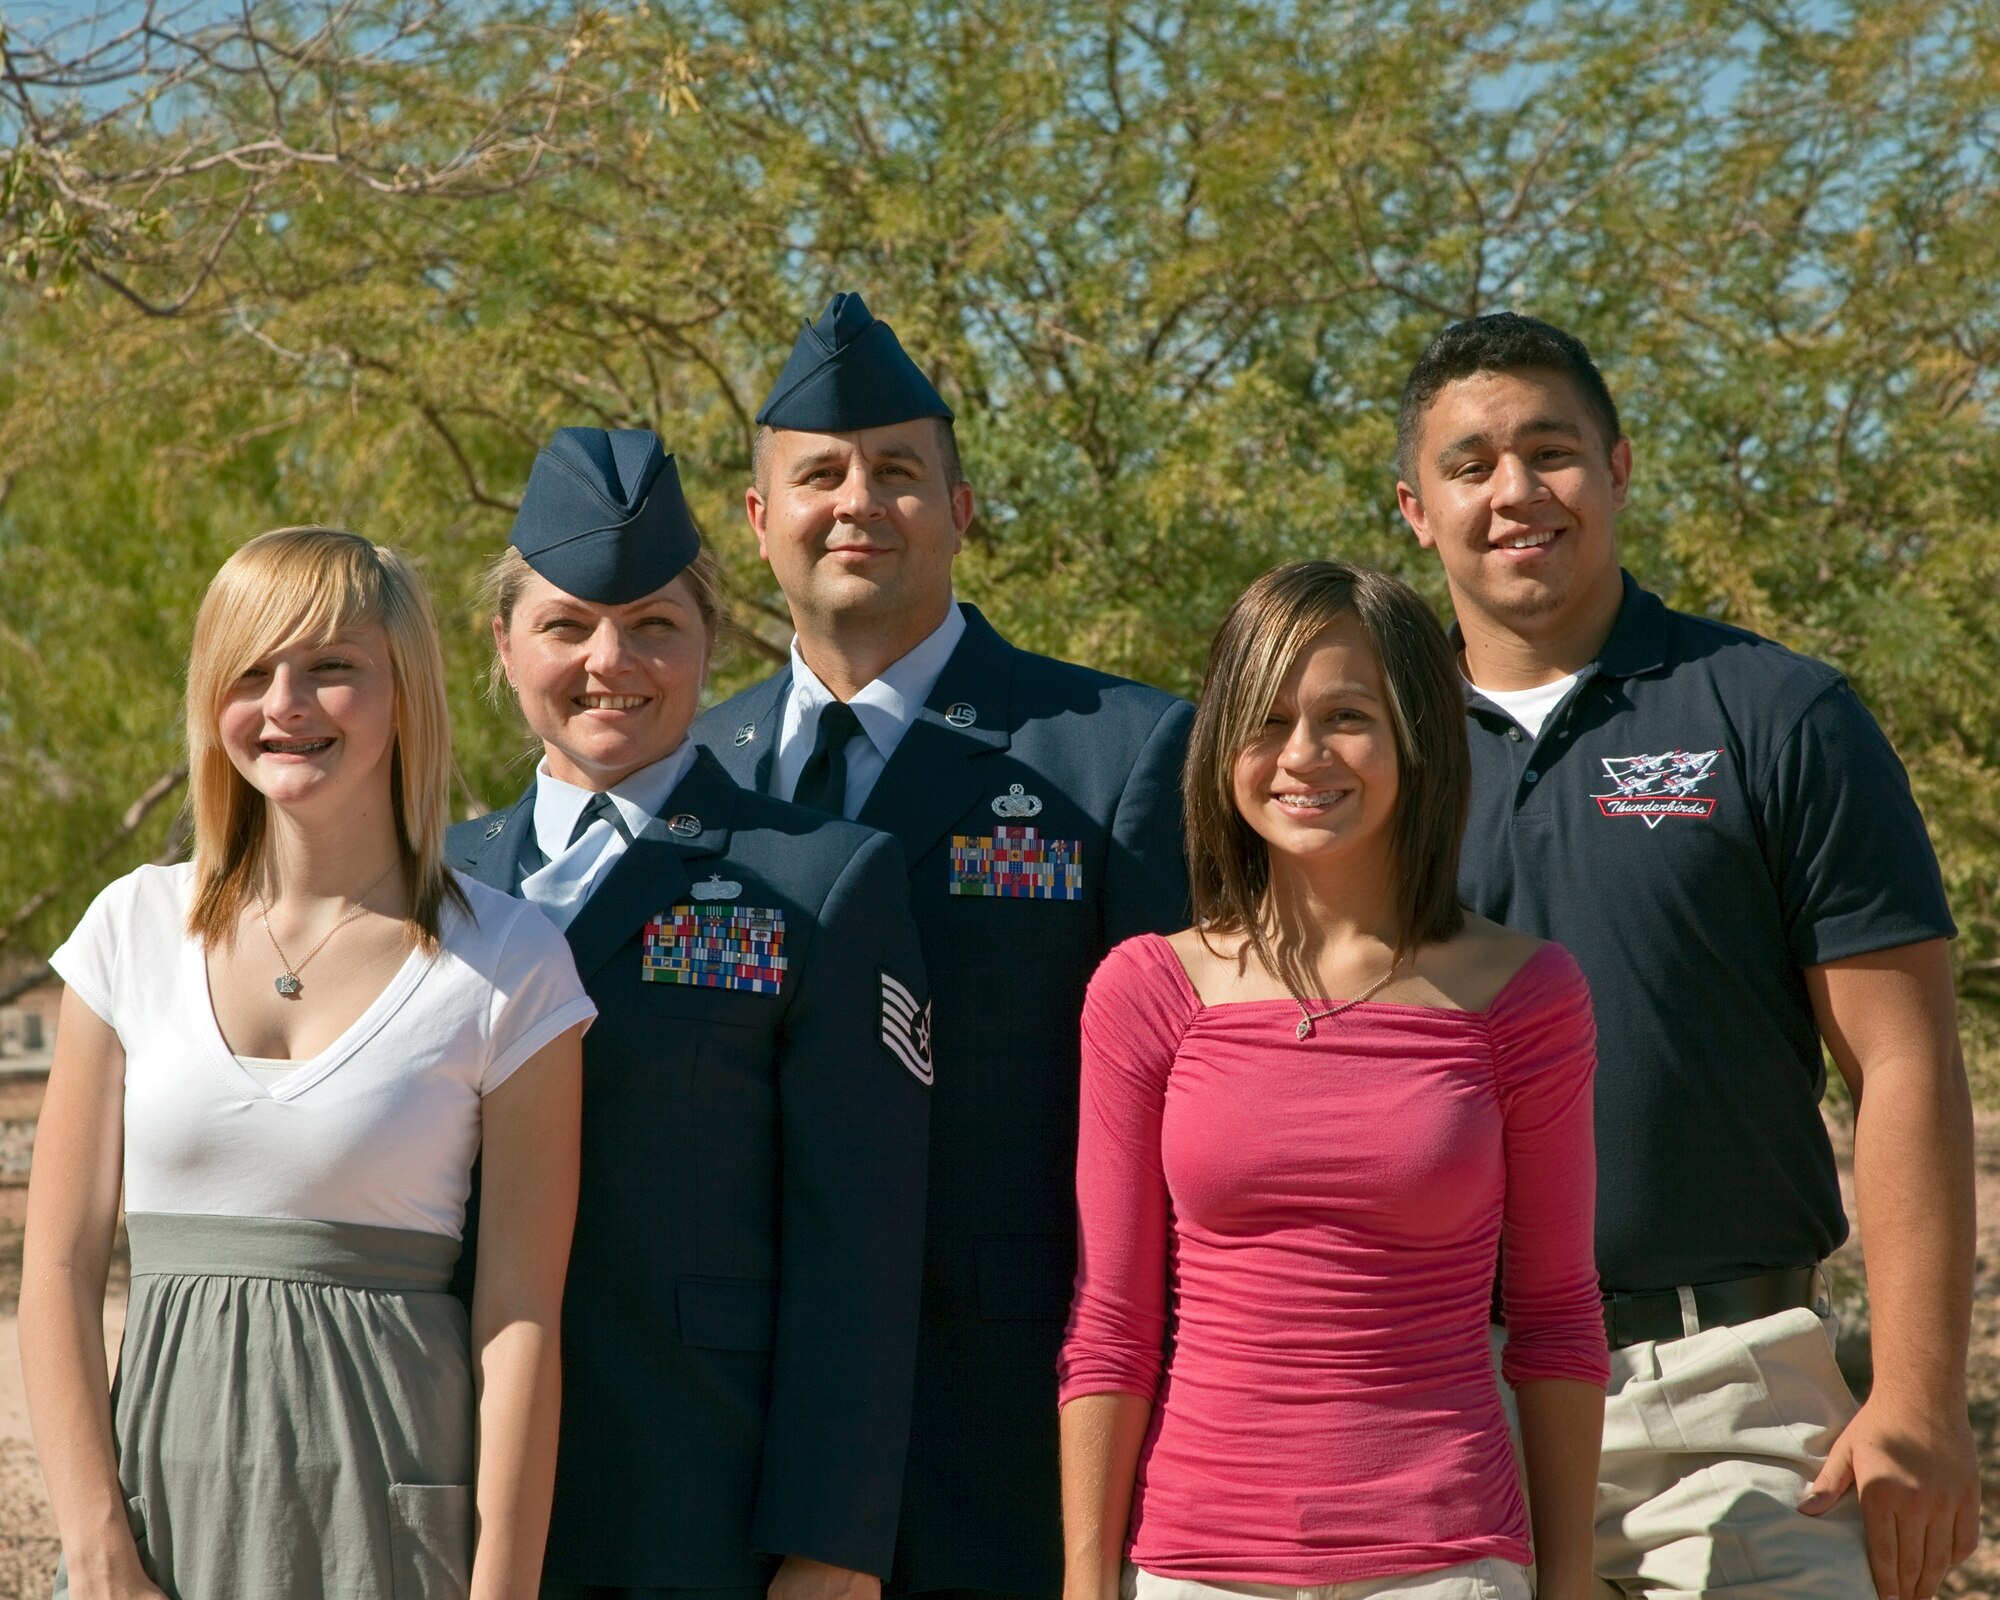 The Ojala family from Nellis Air Force Base, Nev., are the Air Force?s military family of the year. They were in Washington to compete in the National Military Family of the Year completion. From left to right are Kalie Ojala, Tech. Sgt. Thane Ojala, Master Sgt. Wayne Ojala, Katherine Ojala and Jari Ojala. (Courtesy photo)